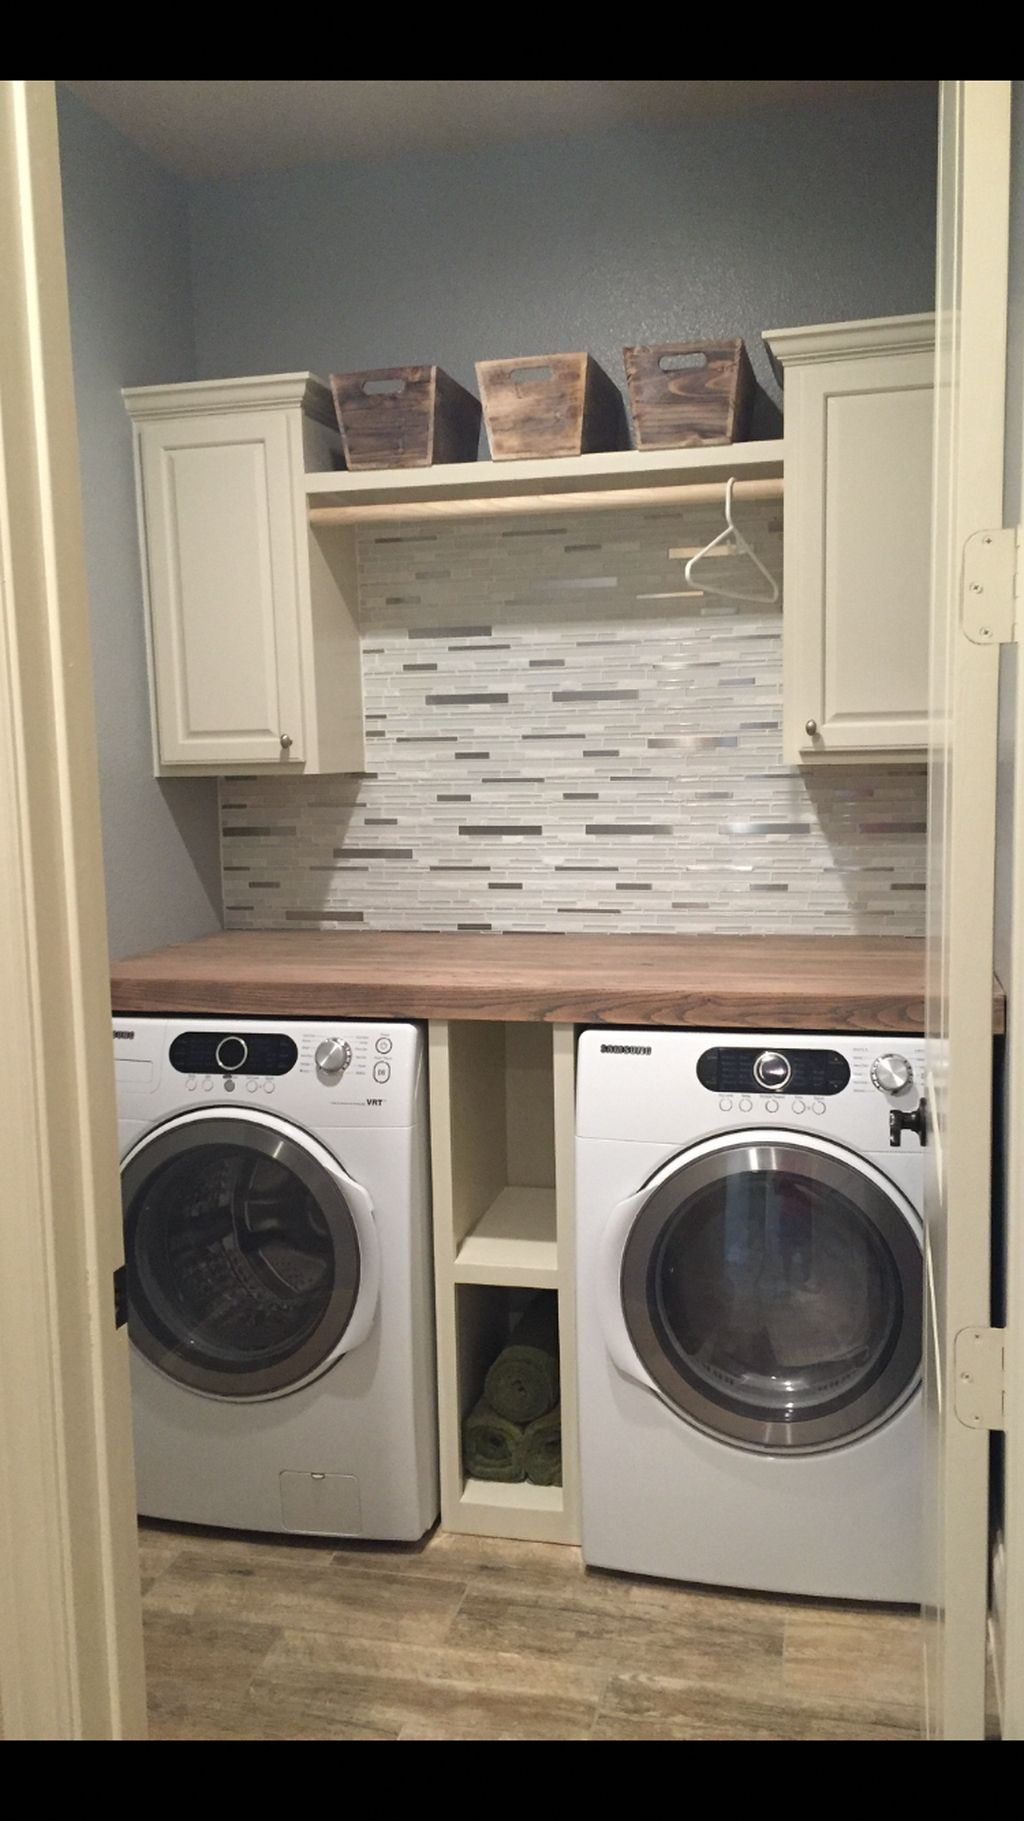 Favored Laundry Room Organization Ideas To Try 46